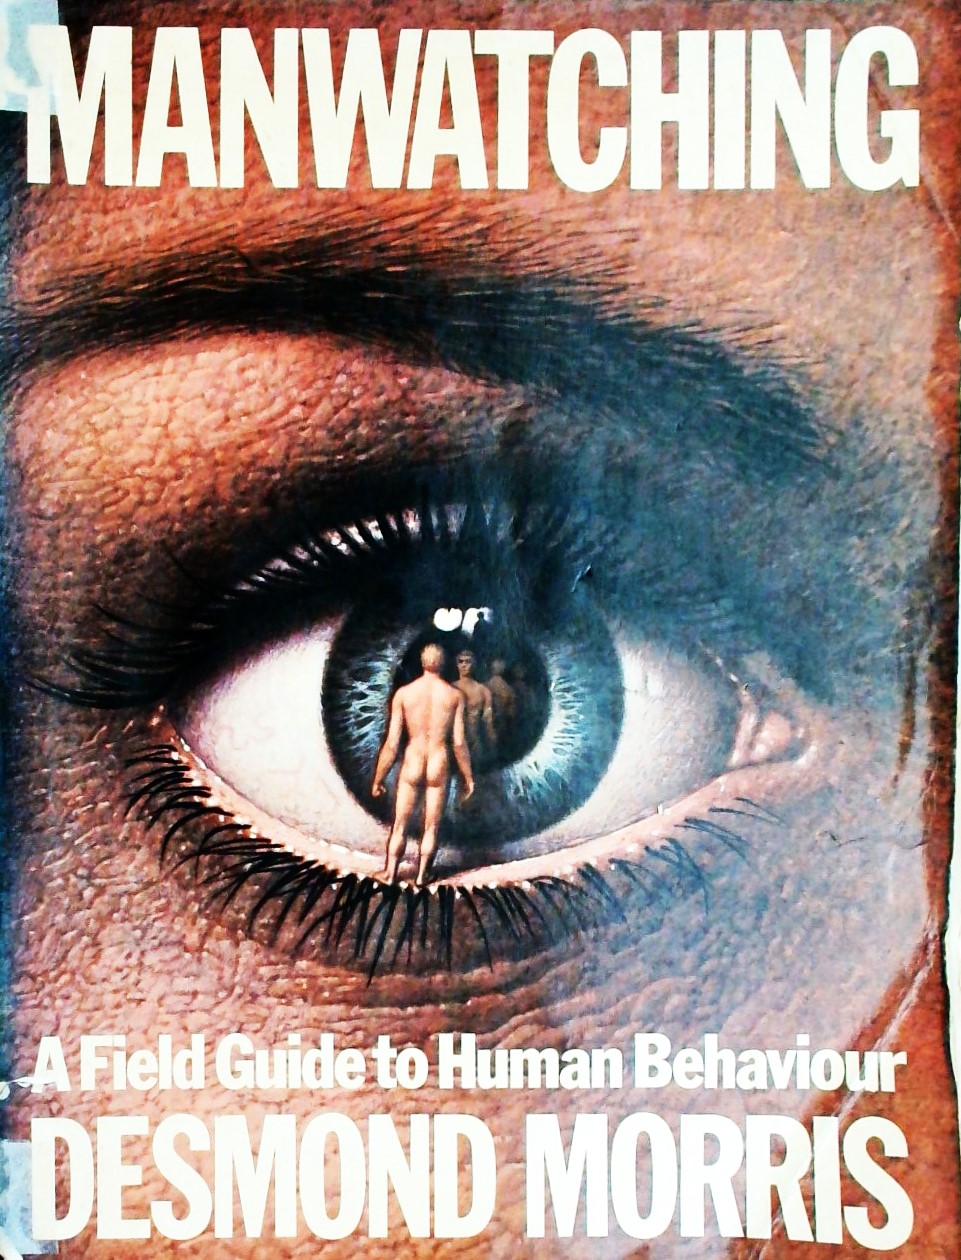 MANWATCHING-A FIELD GUIDE TO HUMAN BEHAVIOUR